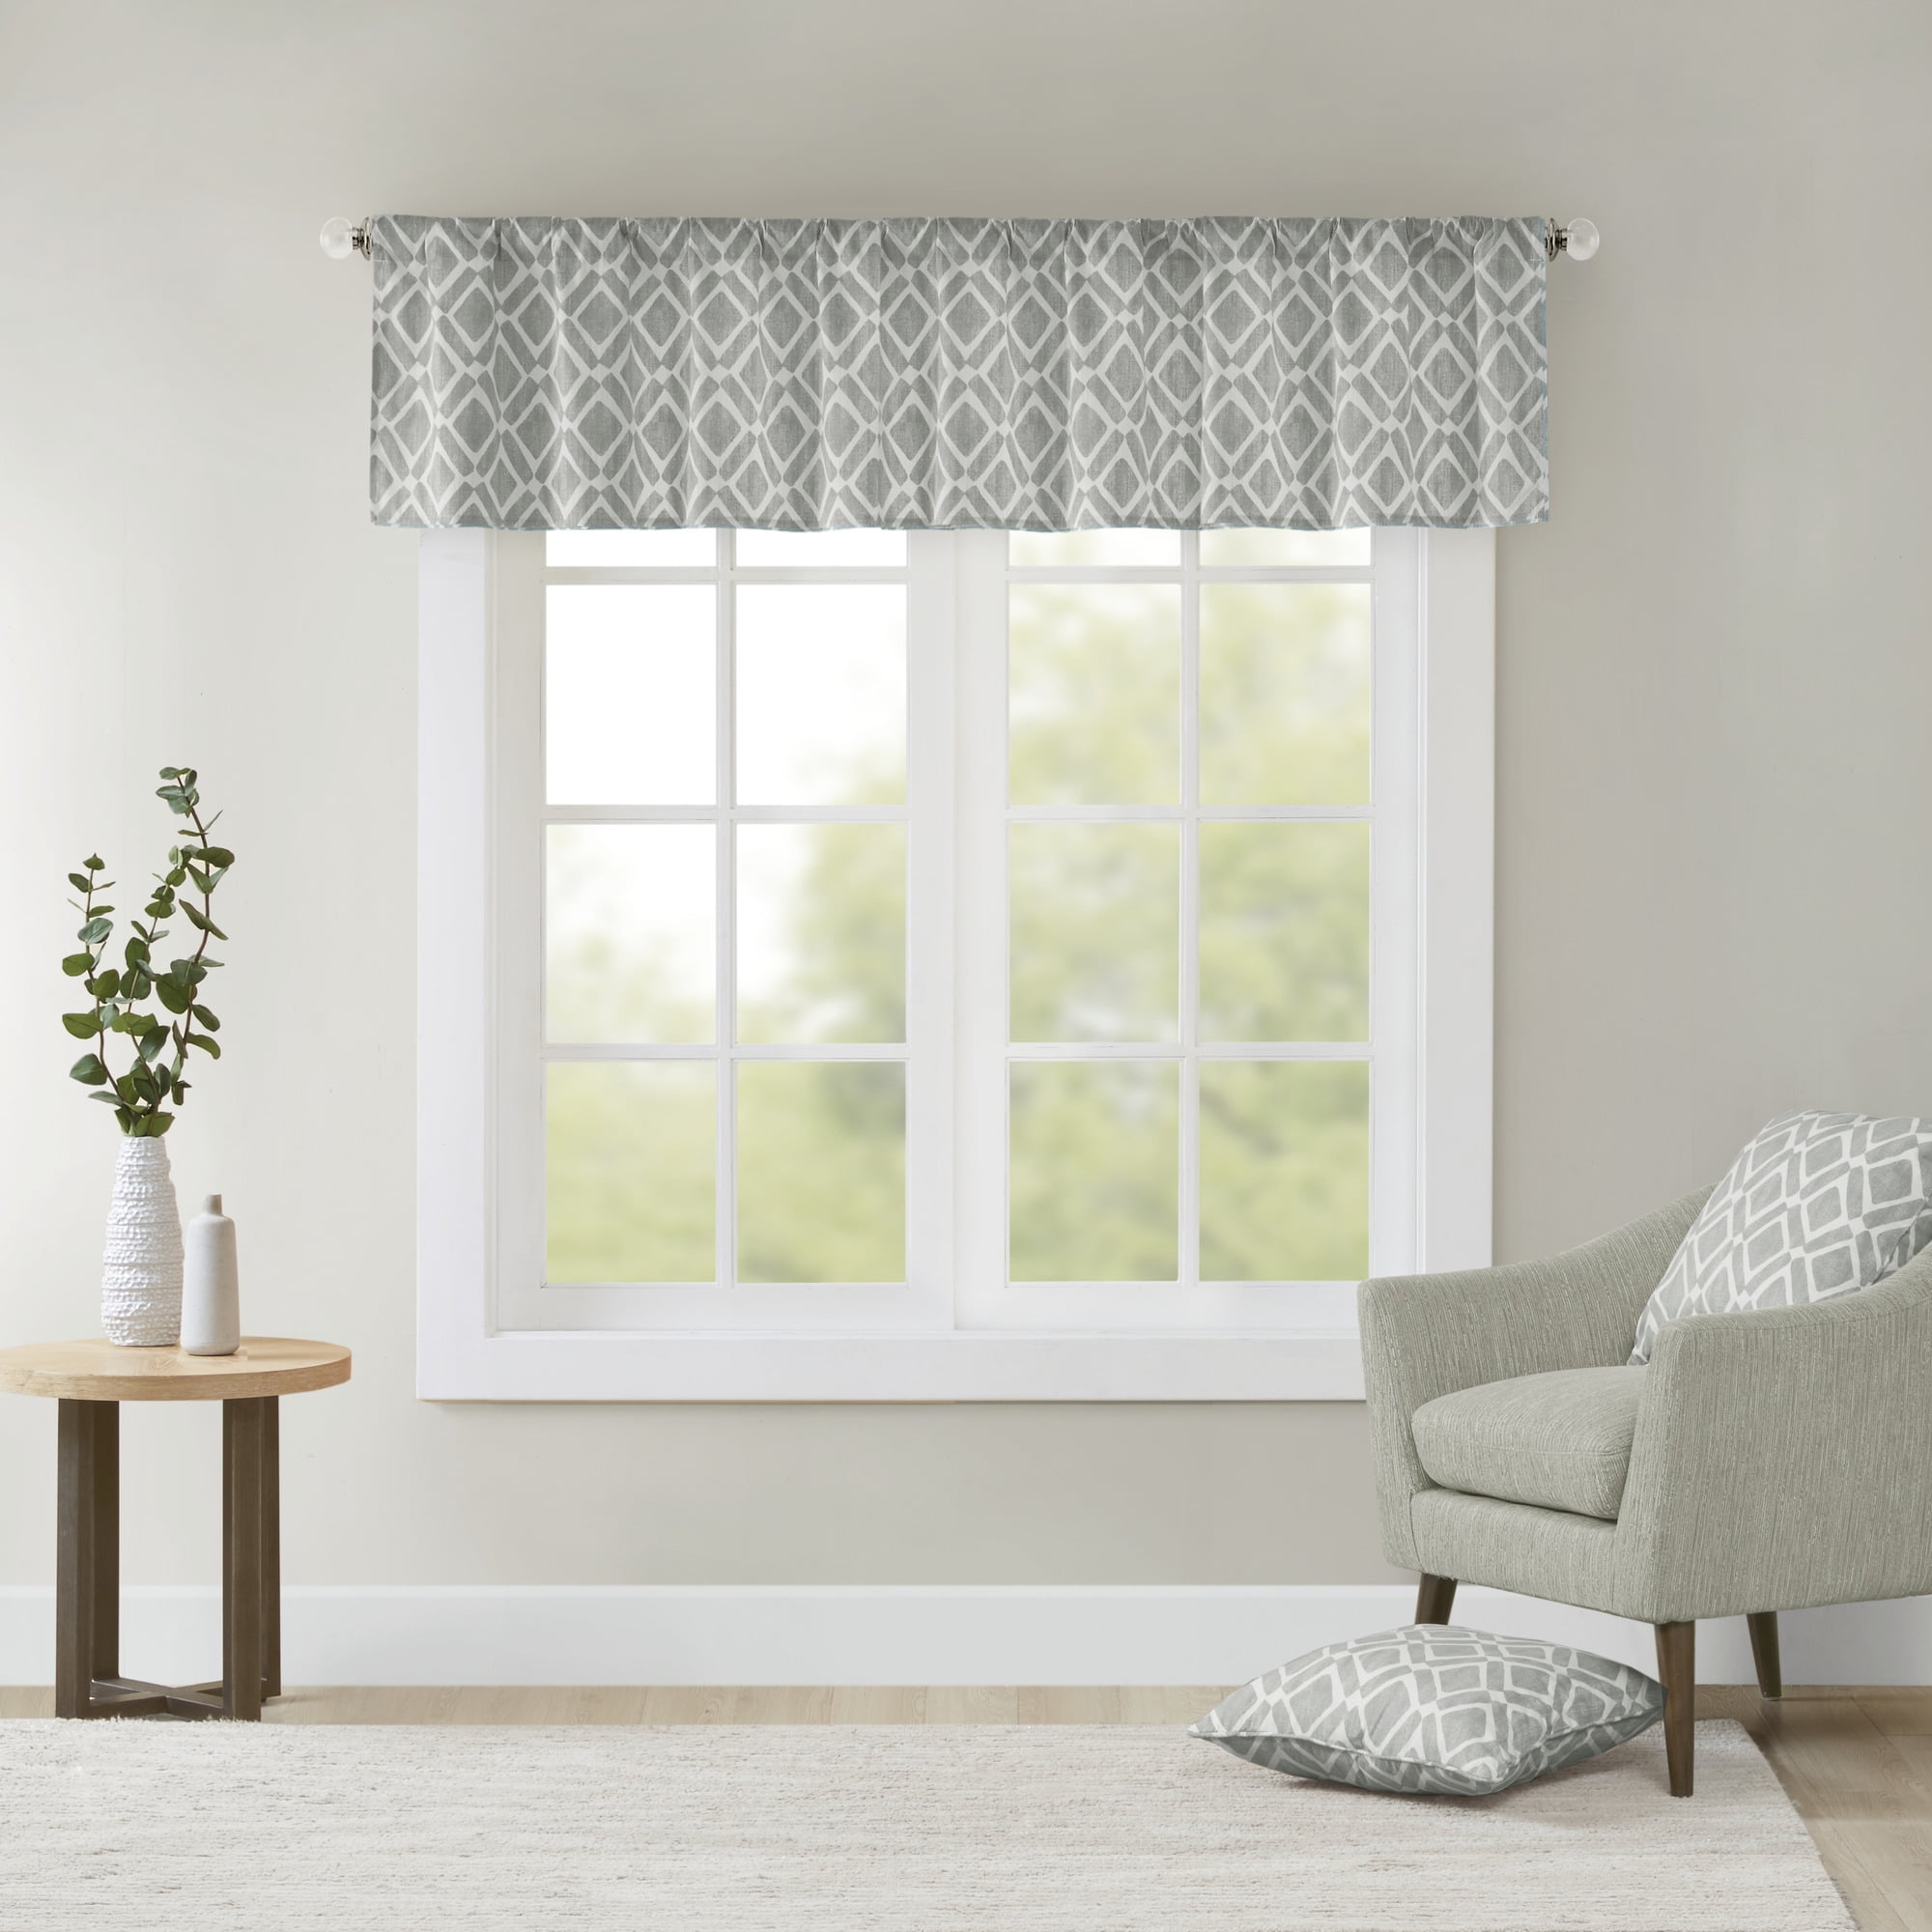 Details about   1/2/4 Panel Morocco Voile Net Window Curtains Valance Draps Living Room Bedroom 